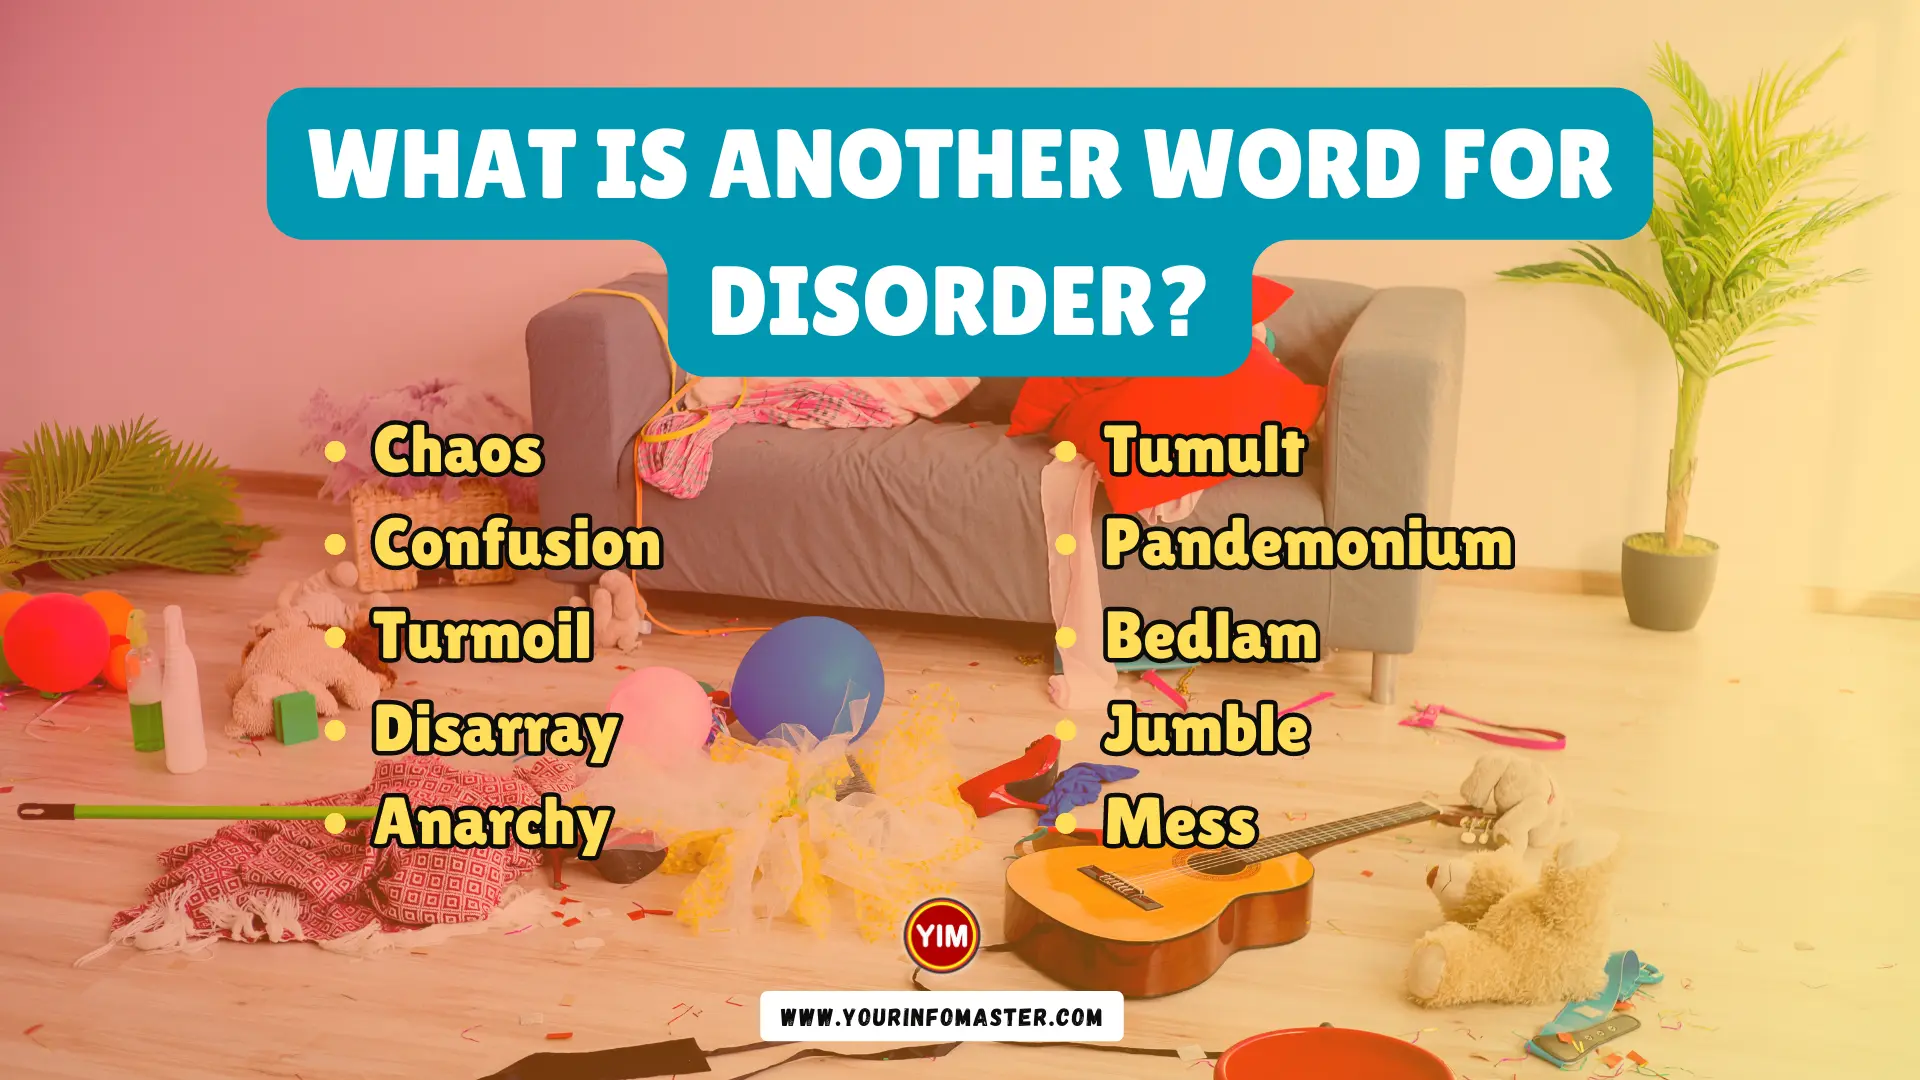 What is another word for Disorder